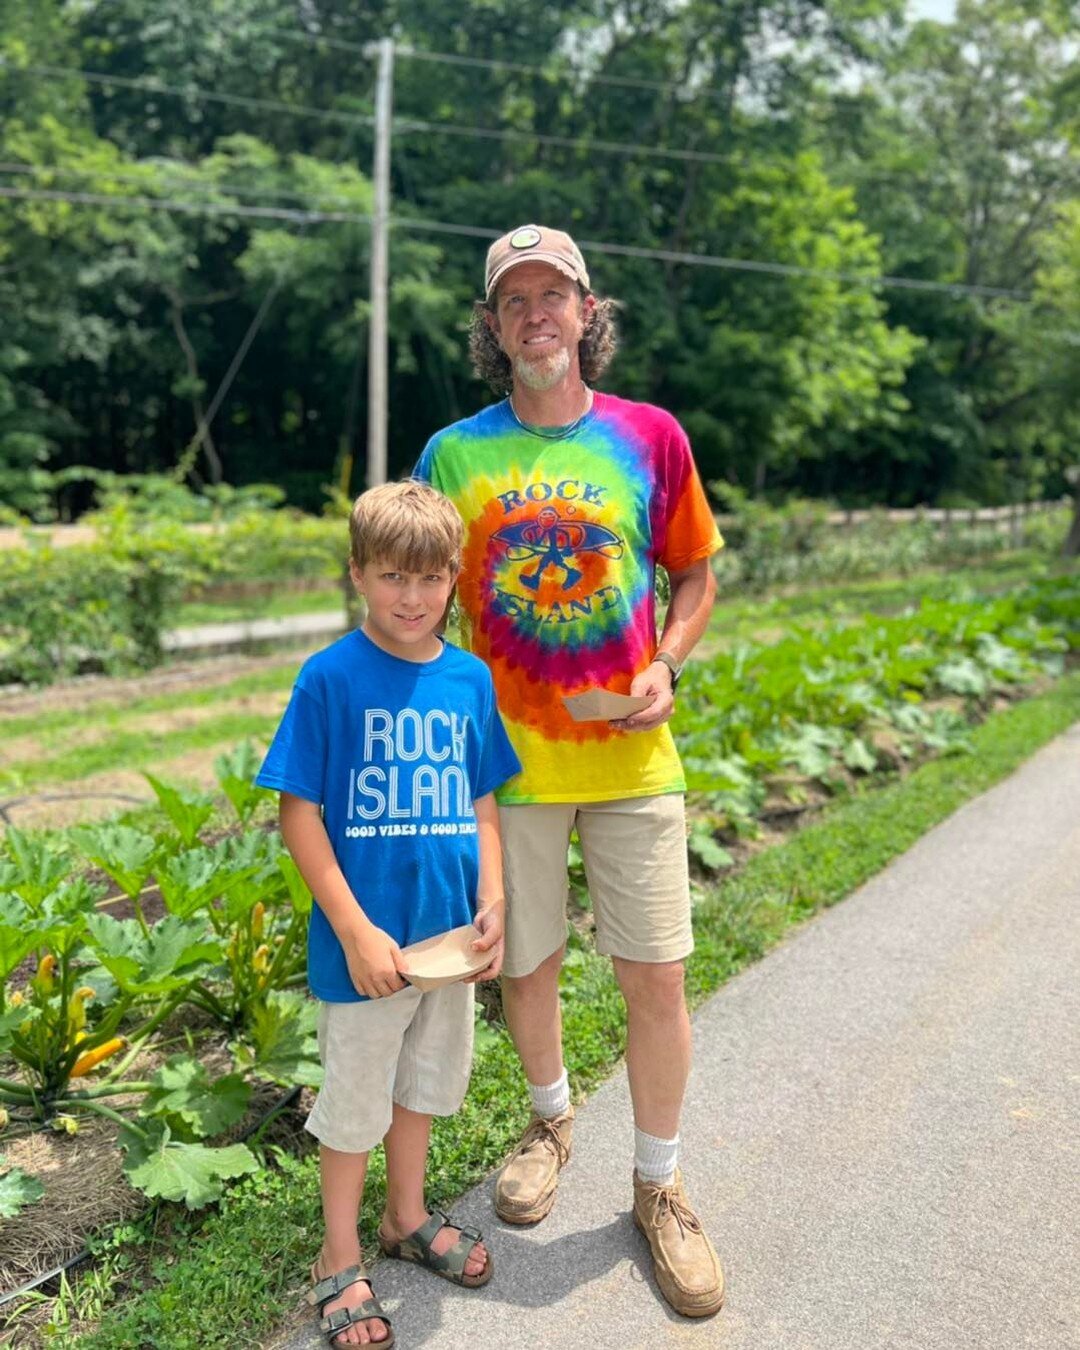 Pictures are the resident senior and junior farmers, with a vegetable specialty, representing our fine town of ROCK ISLAND today while planting summer lettuces. A recent farm visitor asked how involved our children are&hellip; INTIMATELY, INTEGRALLY,